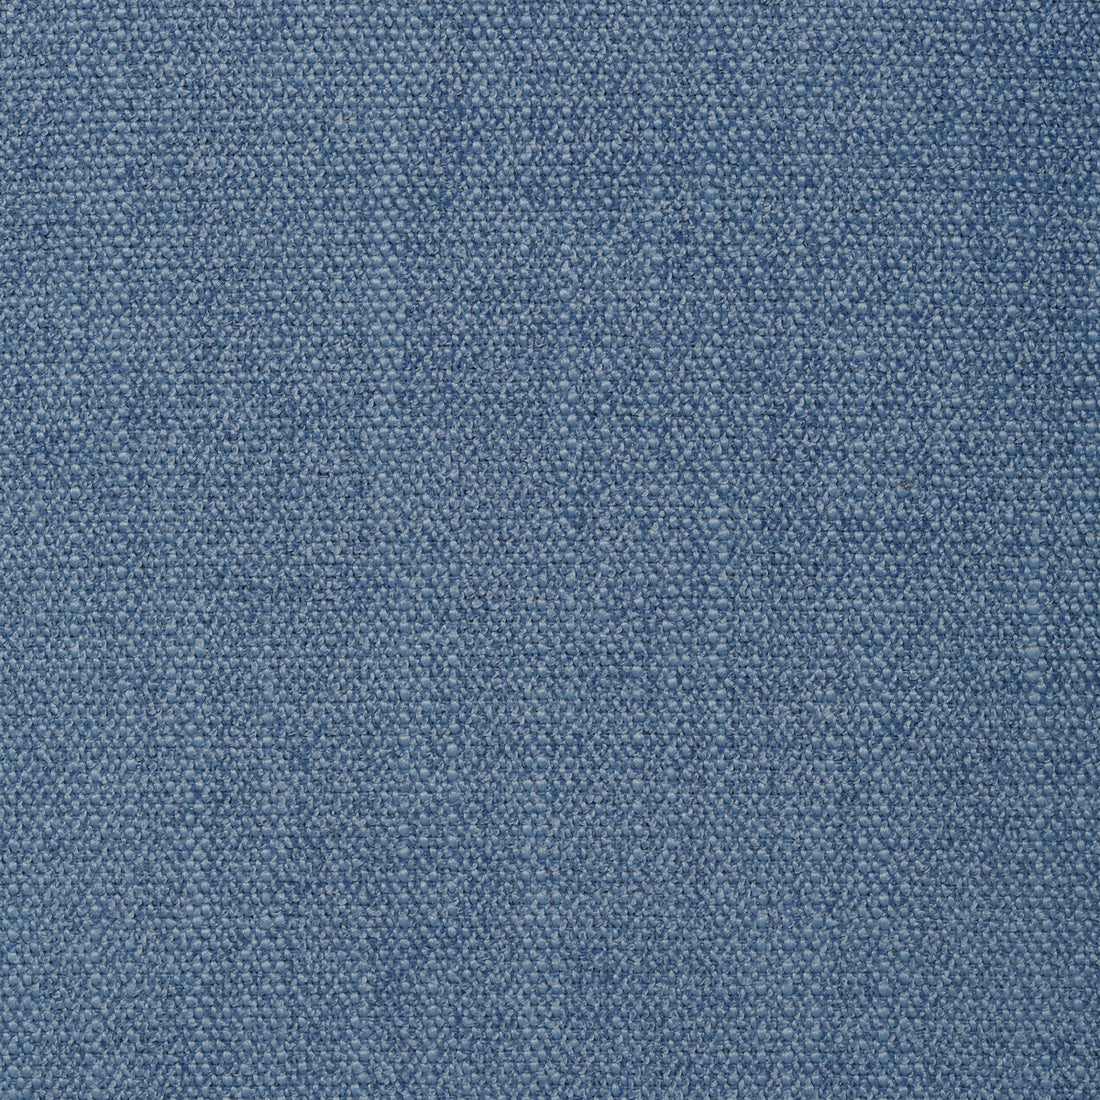 Kravet Contract fabric in 35114-5 color - pattern 35114.5.0 - by Kravet Contract in the Crypton Incase collection